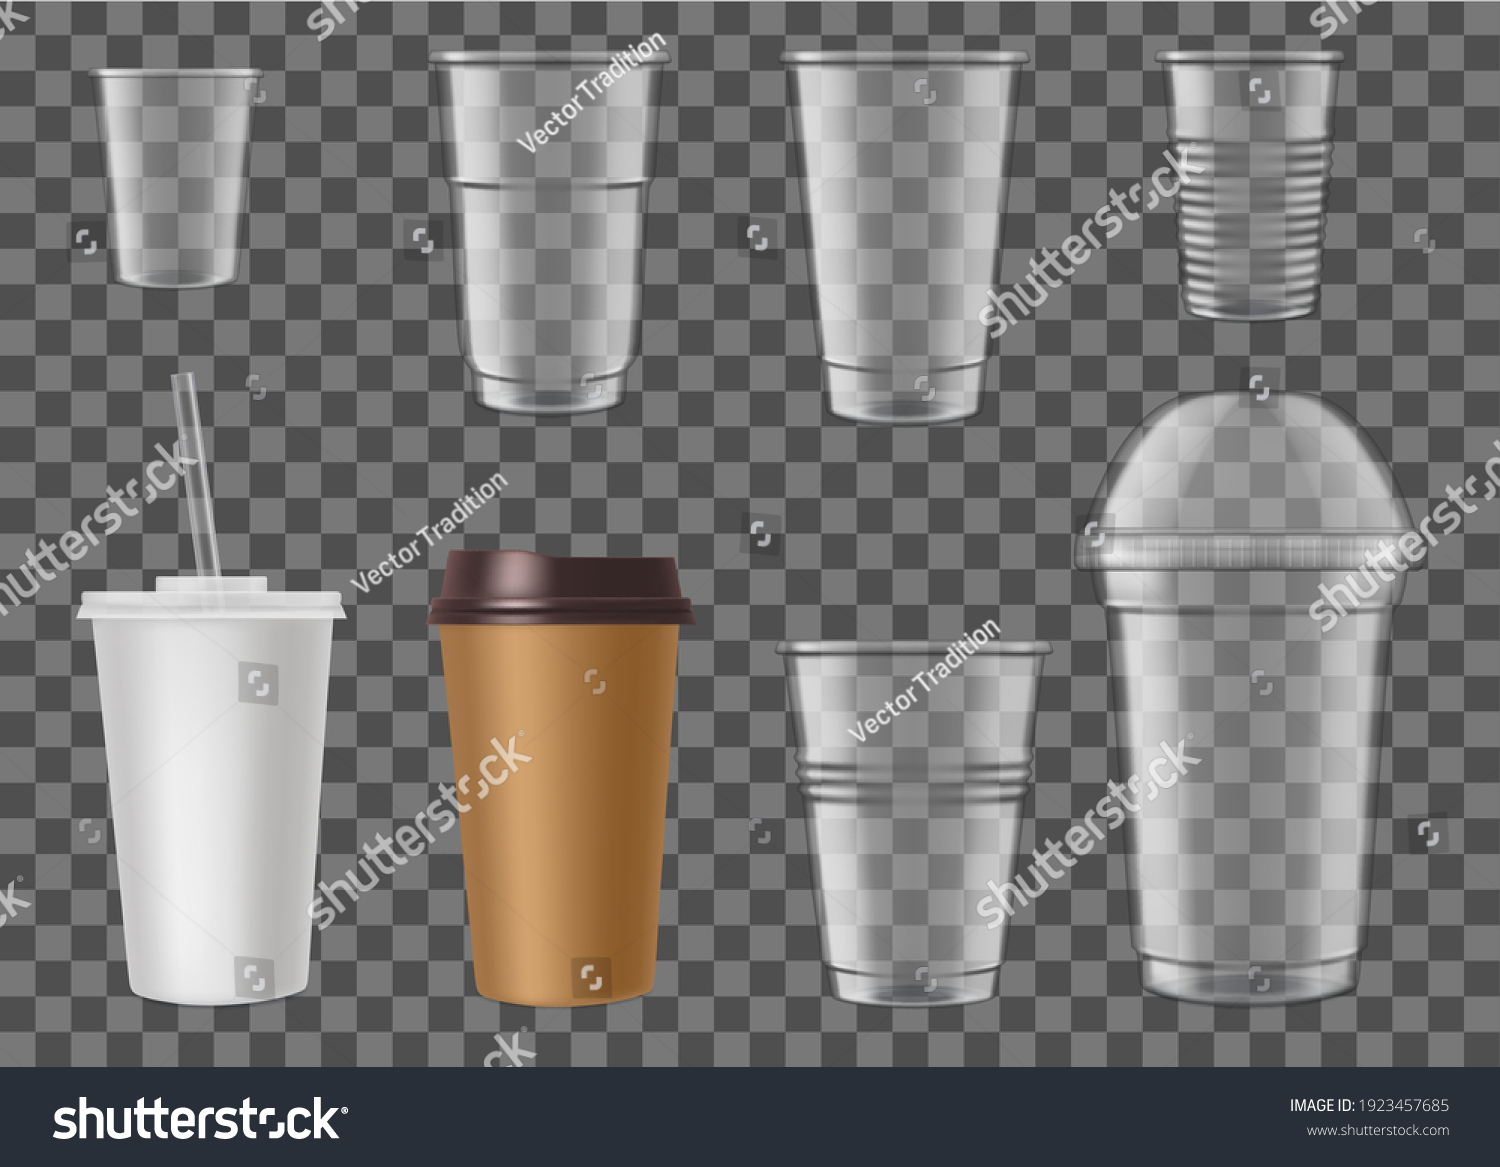 SVG of Disposable plastic cups for fast food cafe drinks mockup. Empty cardboard and plastic containers for hot and cold beverages, coffee, beer and cocktails with straw and lid 3d realistic vector templates svg